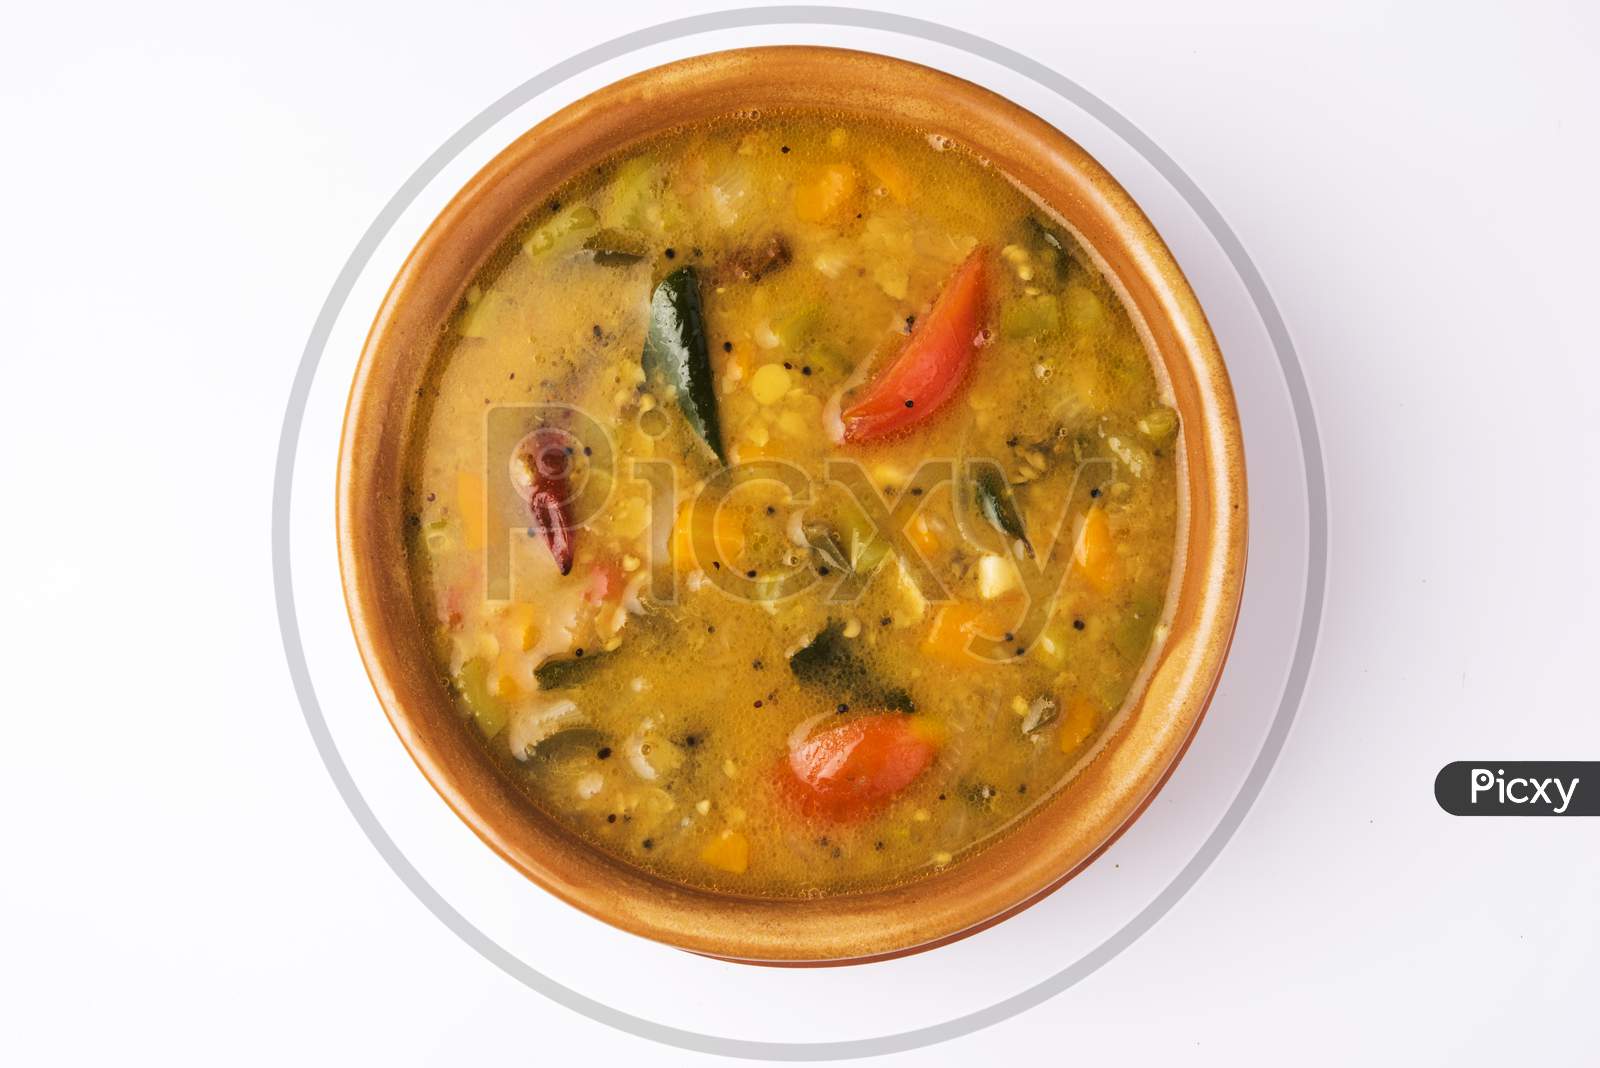 south indian vegetable sambar, in earthen bowl on white background